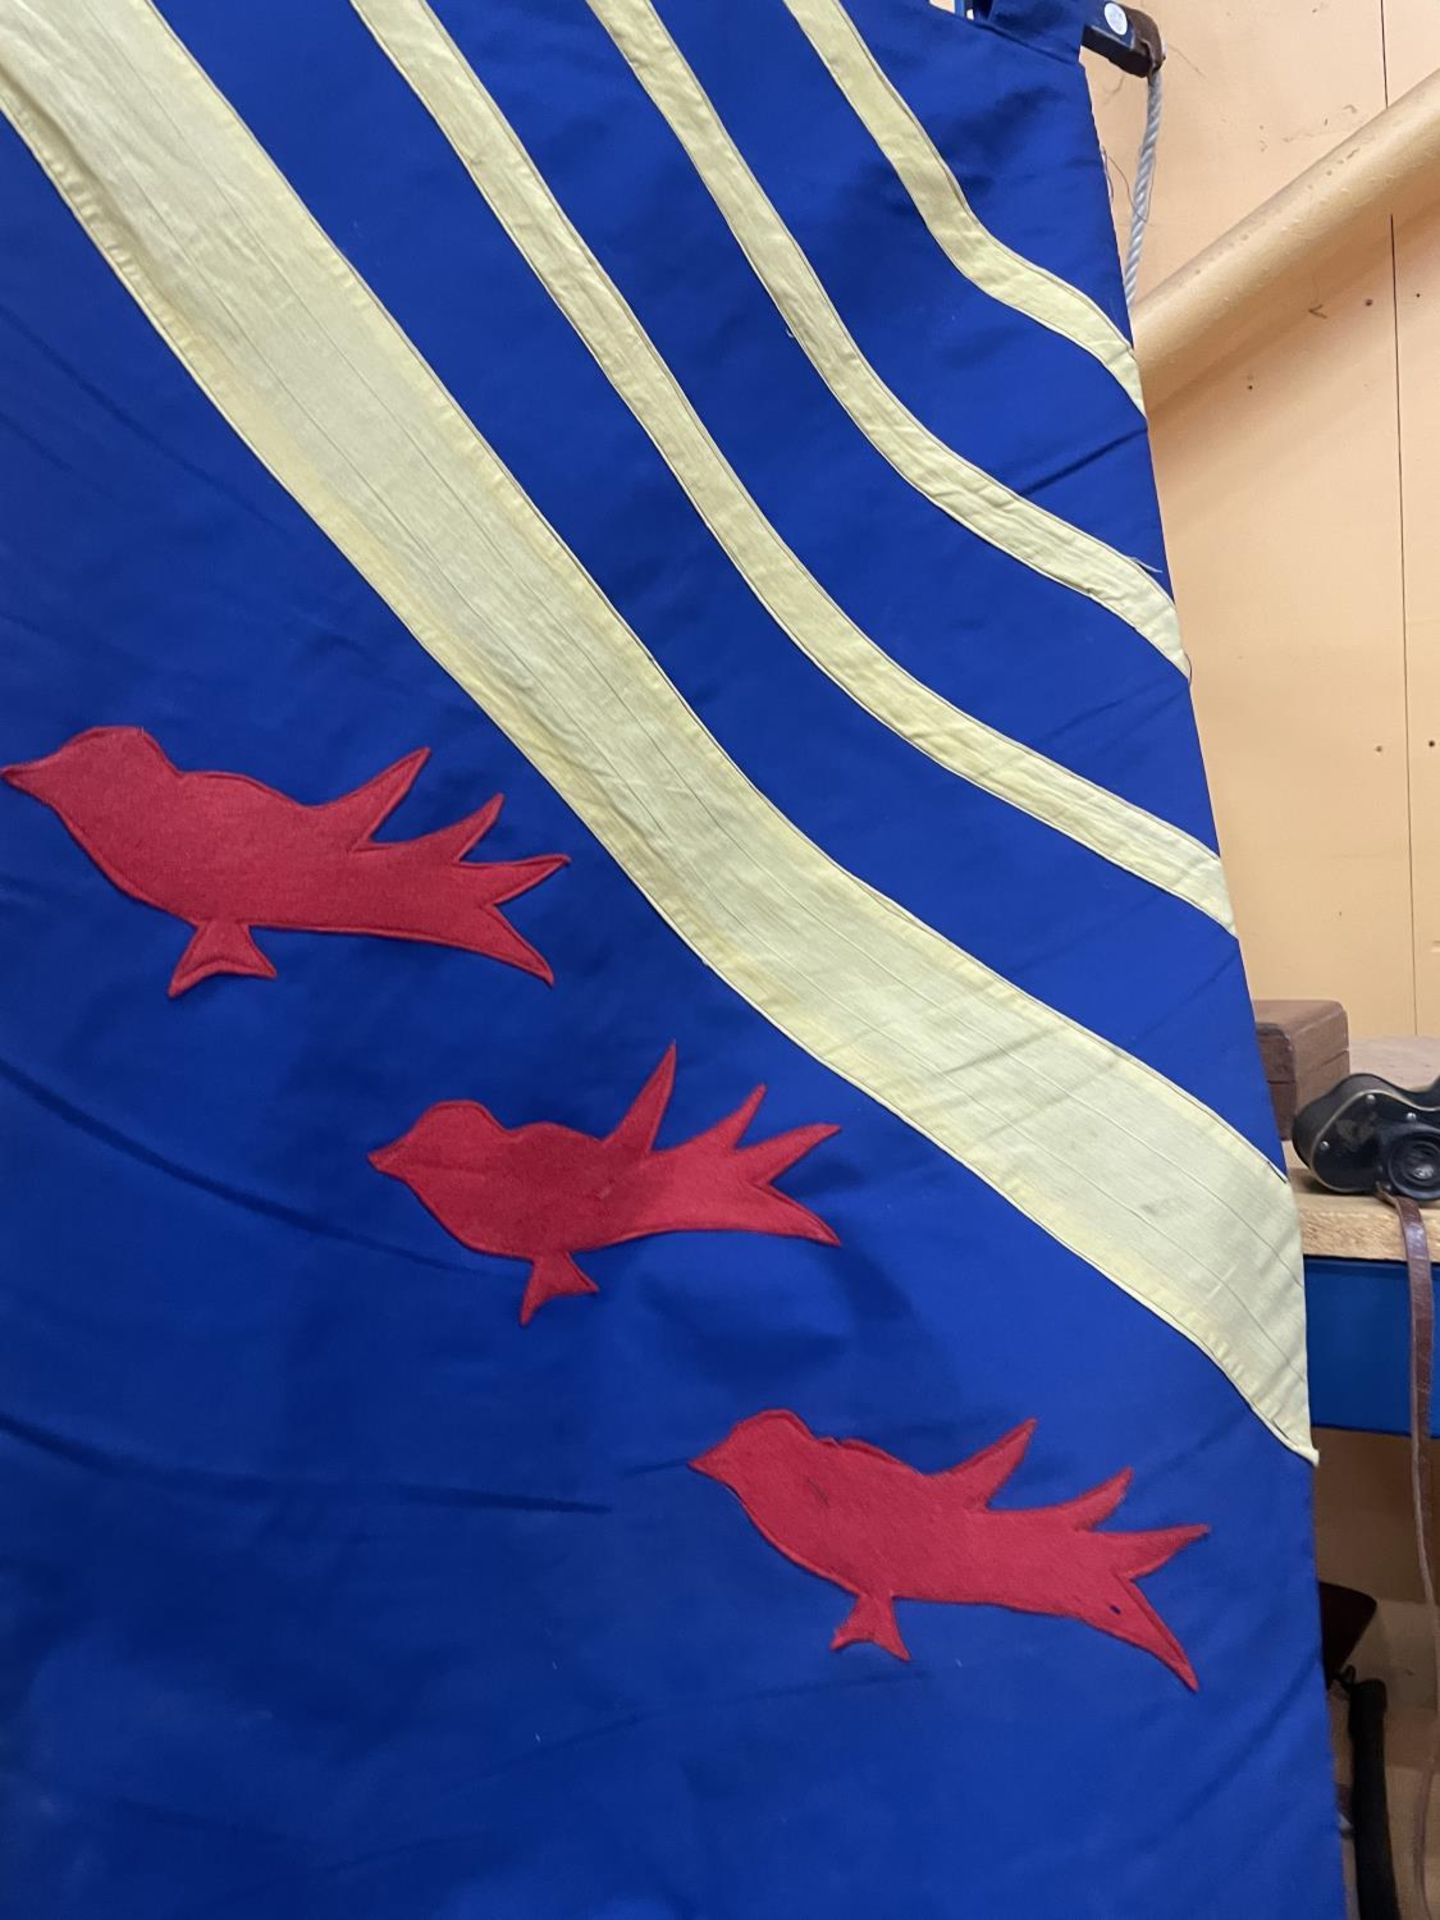 A LARGE HERALDIC BANNER, 135 X 57CM - Image 4 of 4